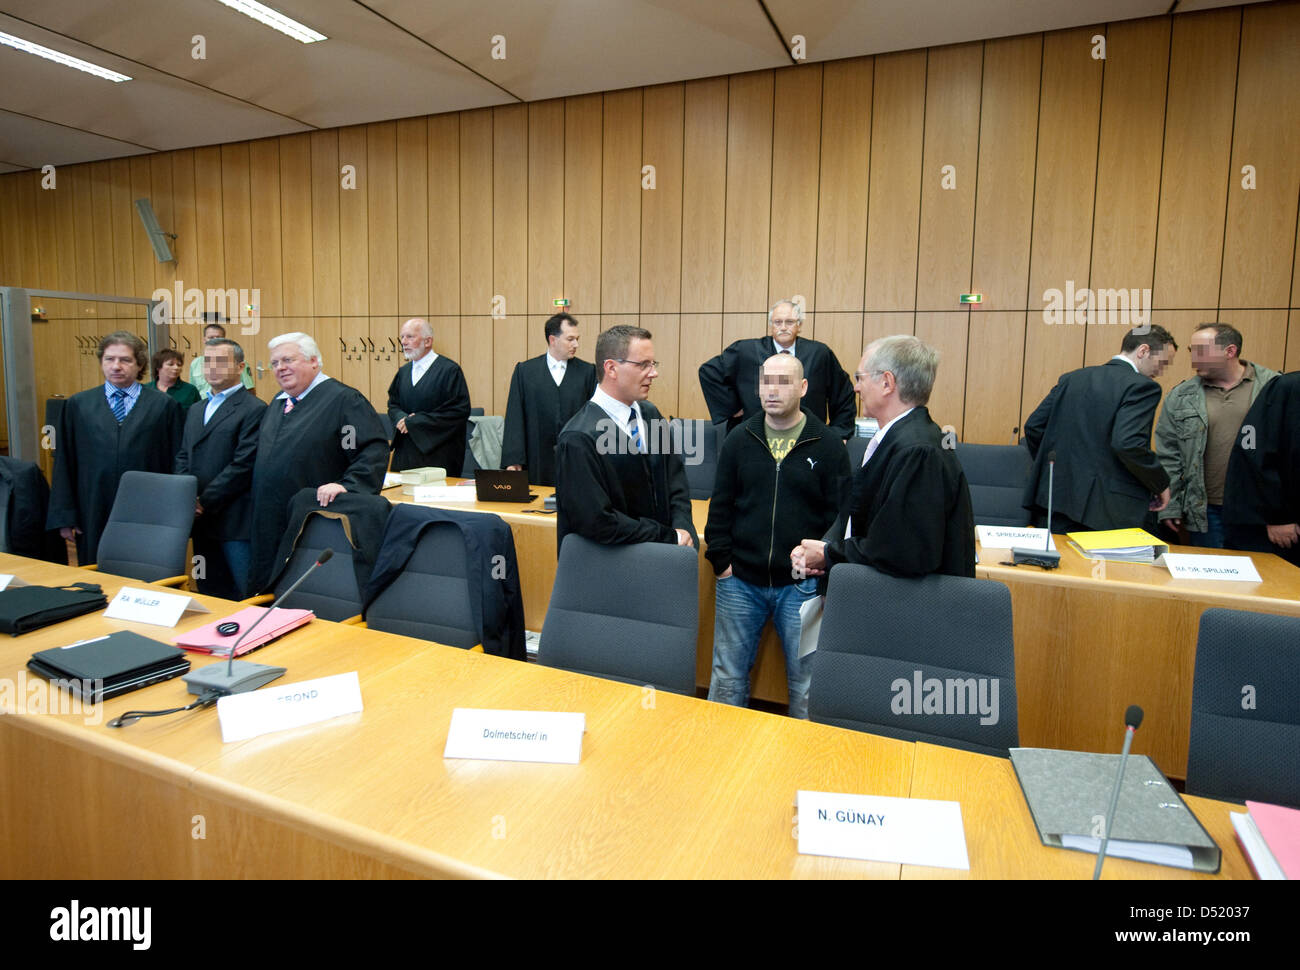 Participants involved in the match-fixing trial stand in the court room of the Regional Court in Bochum, Germany, 06 October 2010. Front row (L-R): Lawyer Reinhard Peters, defendant Tuna A., lawyers Joachim Müller and Joe Therond, defendant Nurellin G., lawyer Jens Meggers. Back row (L-R): Lawyers Fritz von Beesten, Udo Klaus Duits and Hans Geisler, defendants Kristian S. and Steva Stock Photo